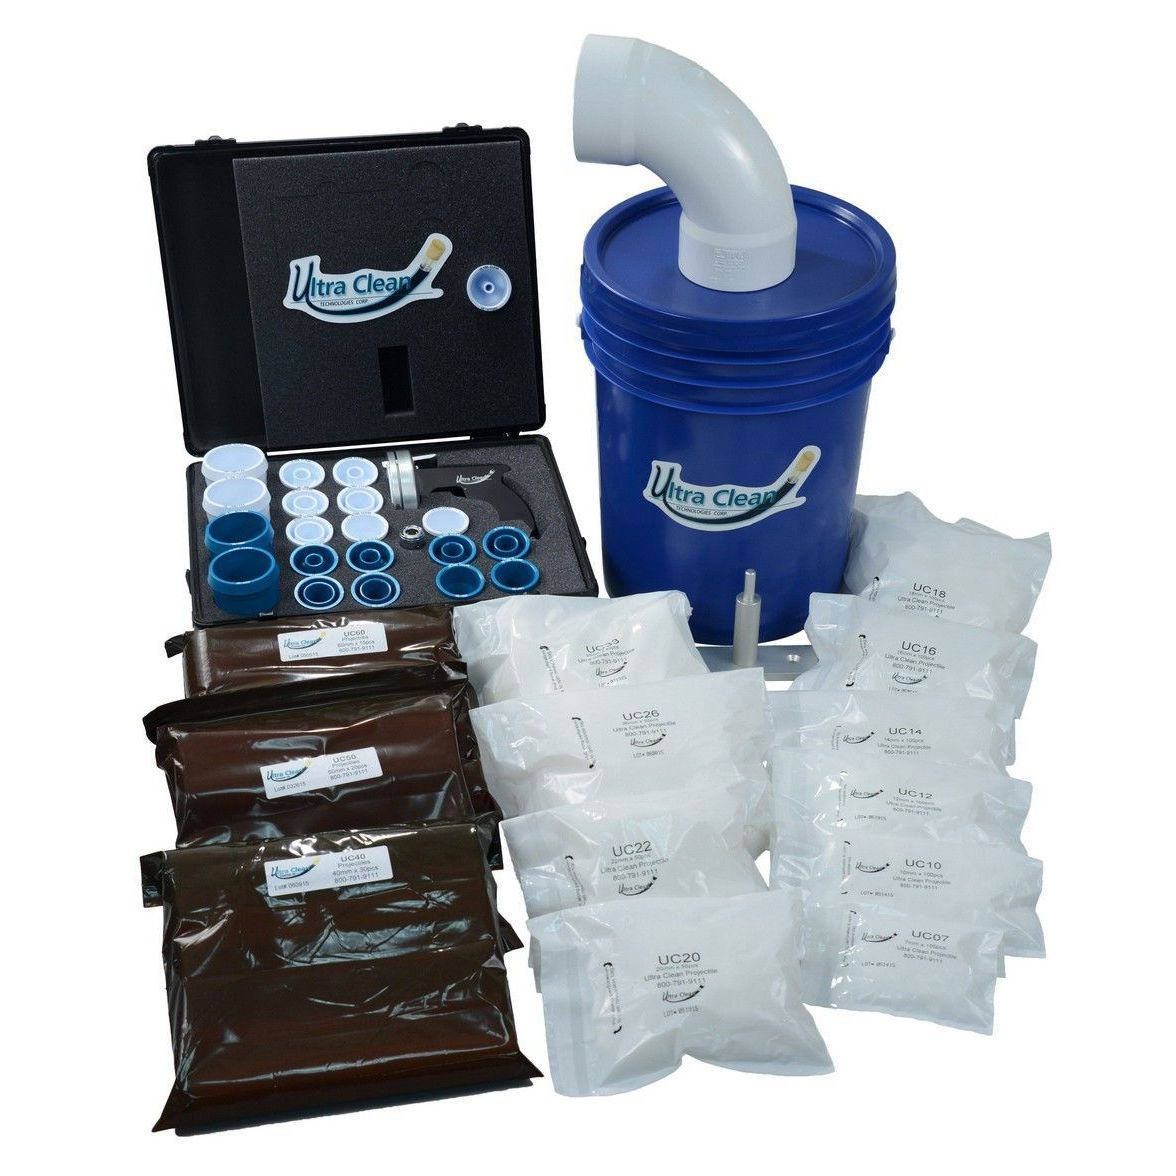 UC-CAP : Ultra Clean Complete 2 Starter Kit with Bucket & Projectiles